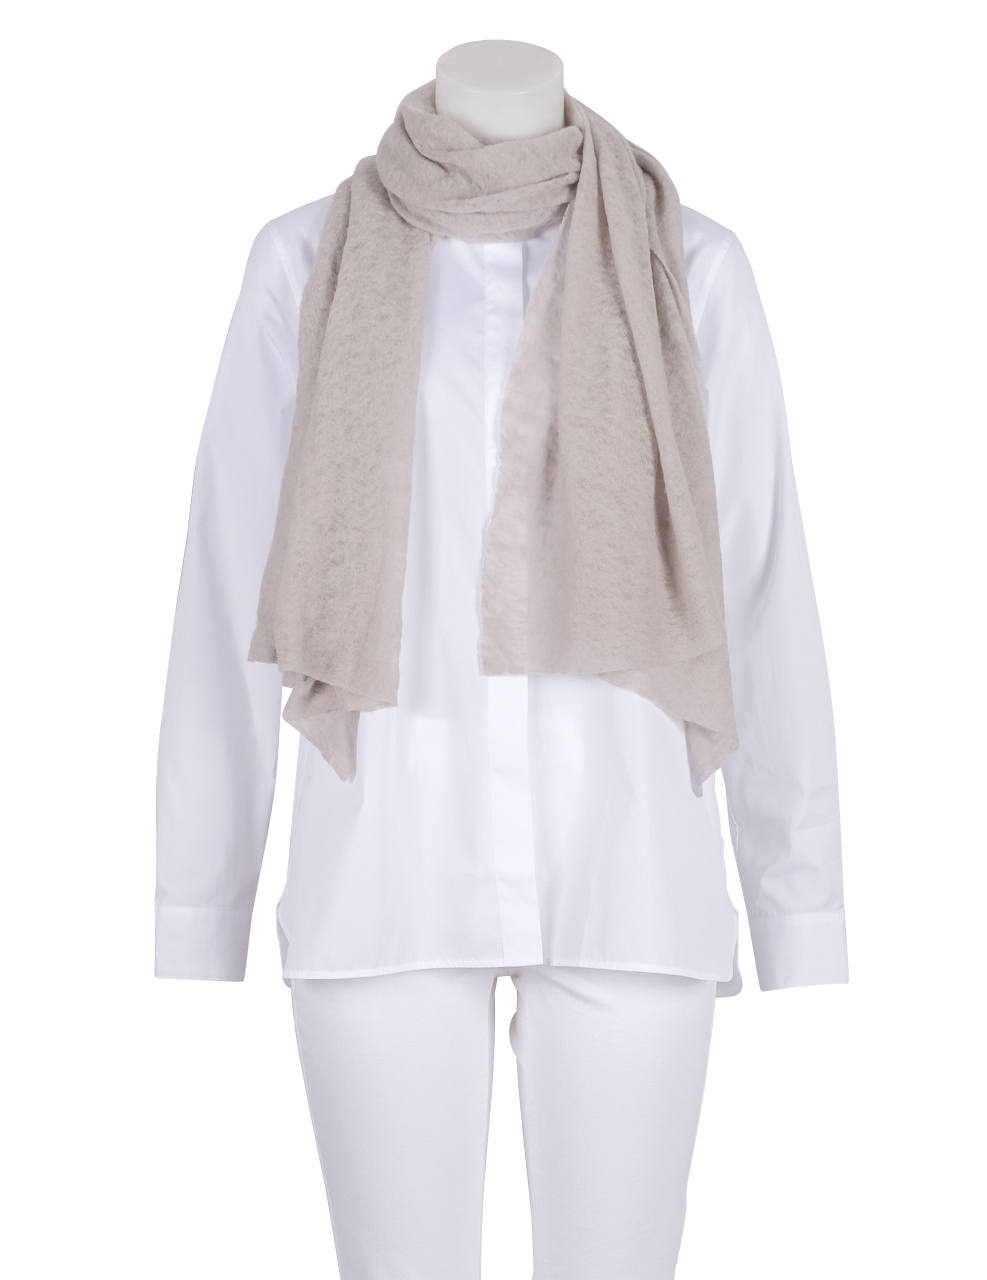 Pin1876 - by Botto Giuseppe - Cashmere-Schal beige